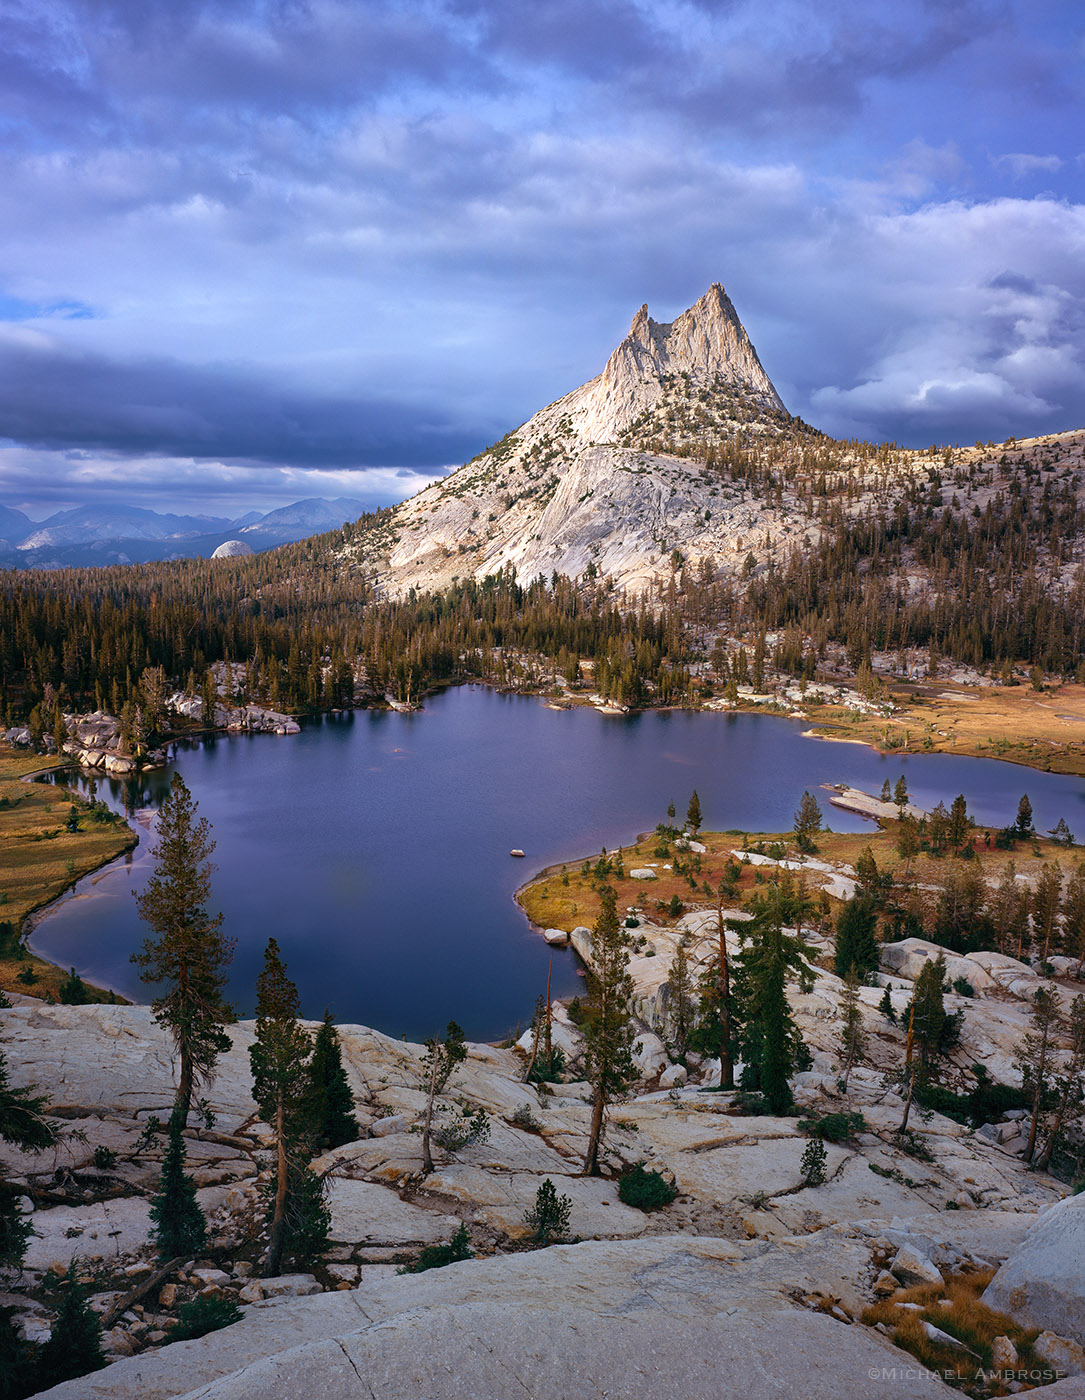  Cathedral Peak is illuminated in stormy  light above stormy Upper Cathedral Lake located in the Tuolumne Meadows section of Yosemite National Park.